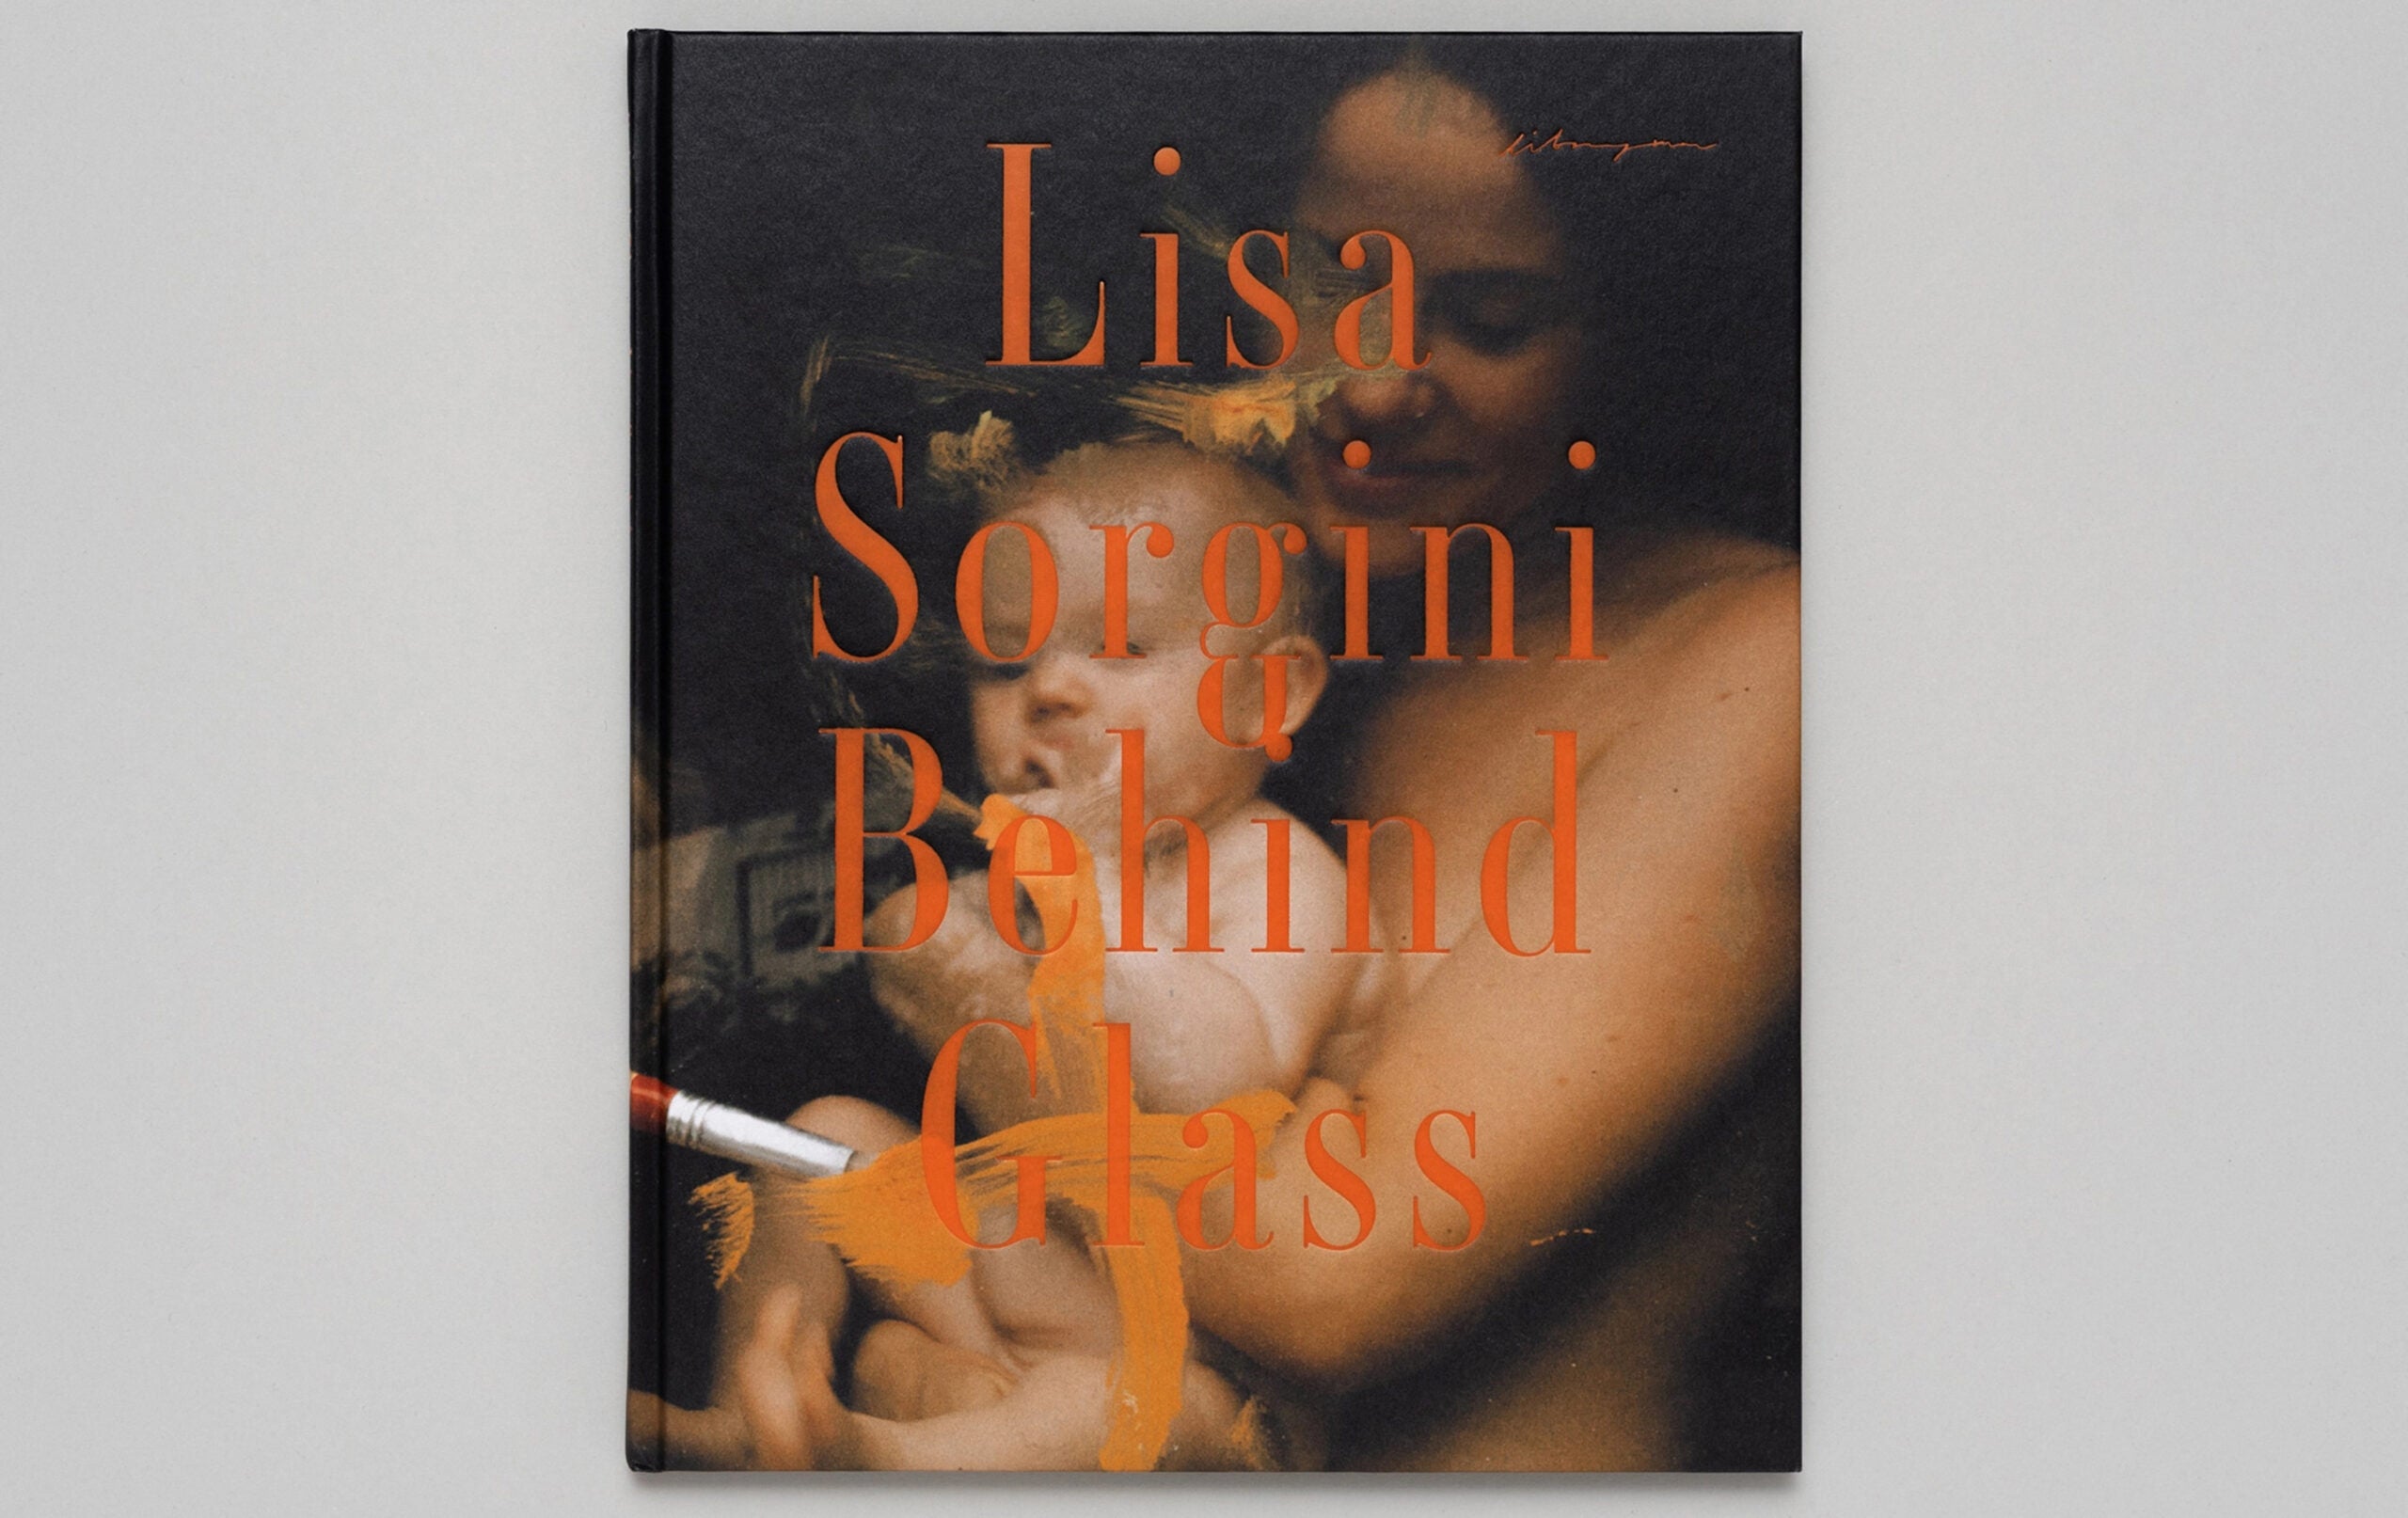 The cover of Lisa Sorgini's Behind Glass